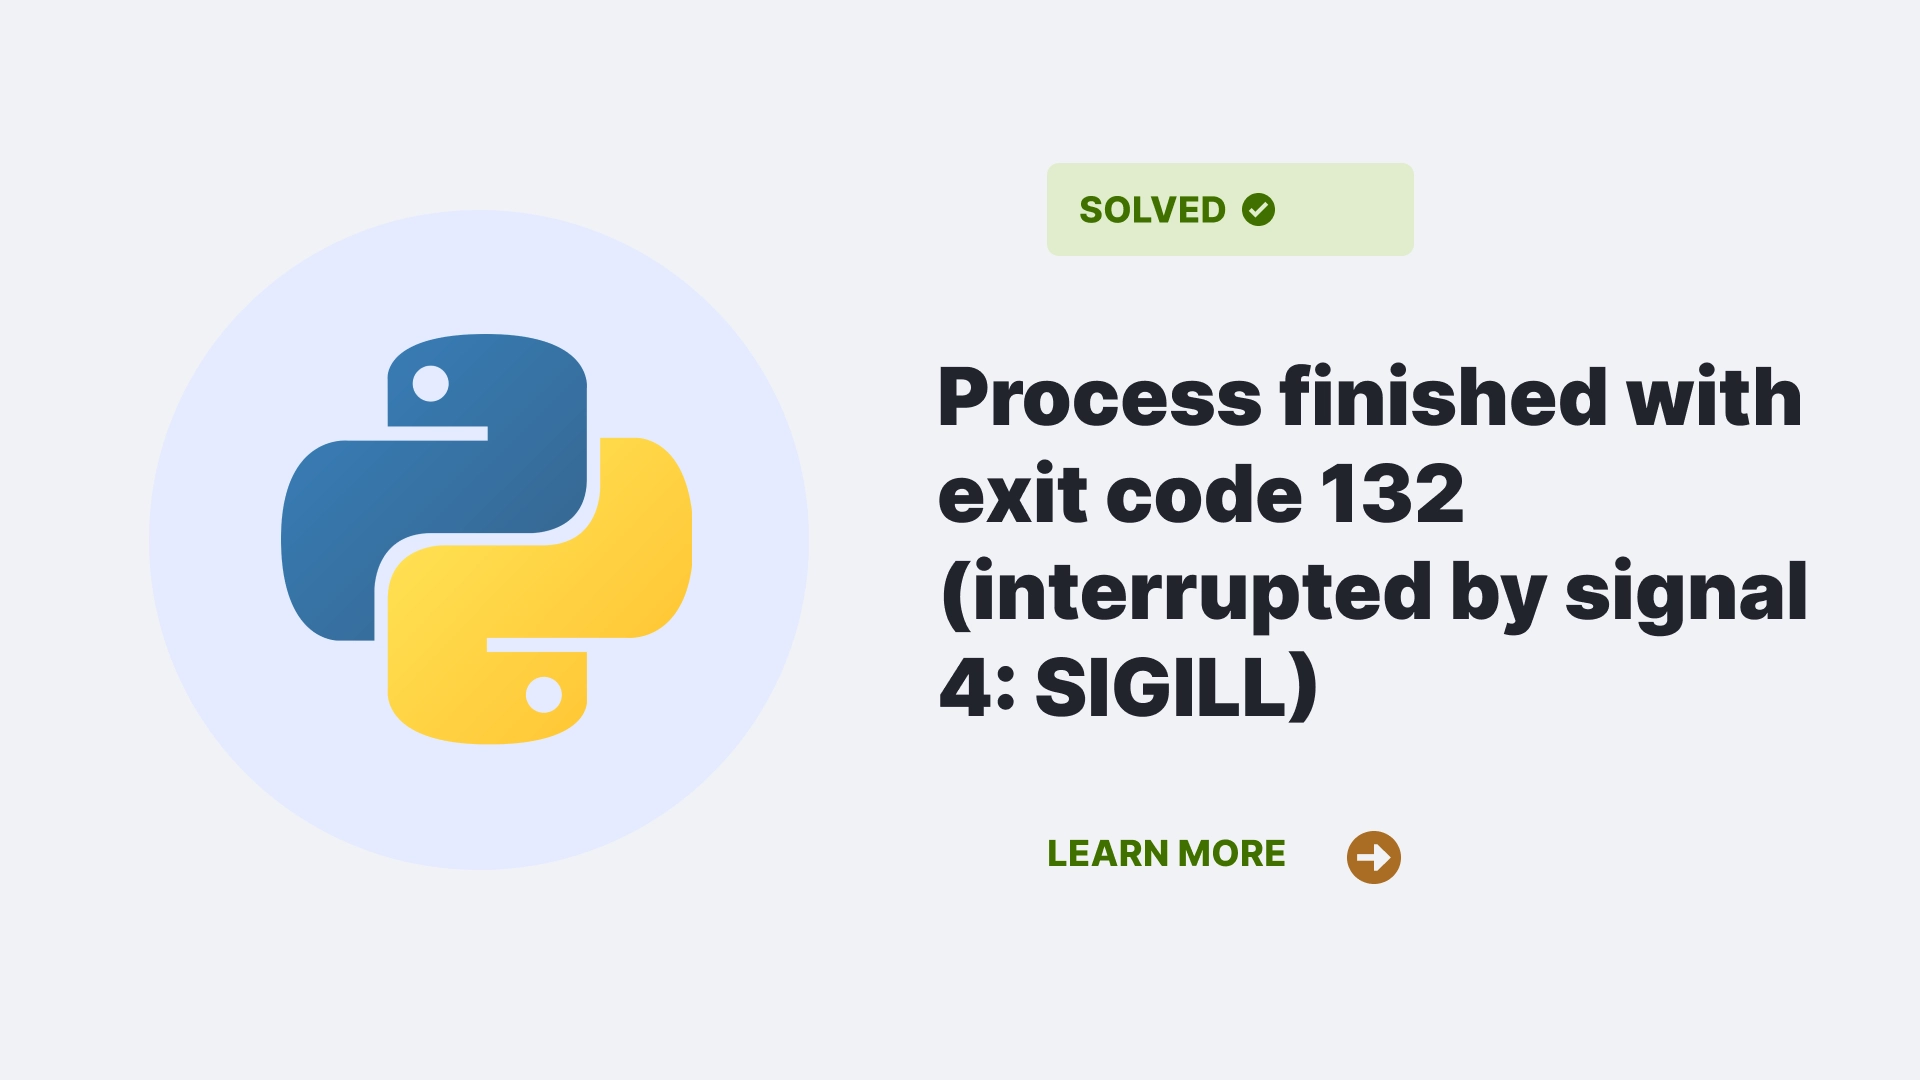 Process finished with exit code 132 (interrupted by signal 4: SIGILL)